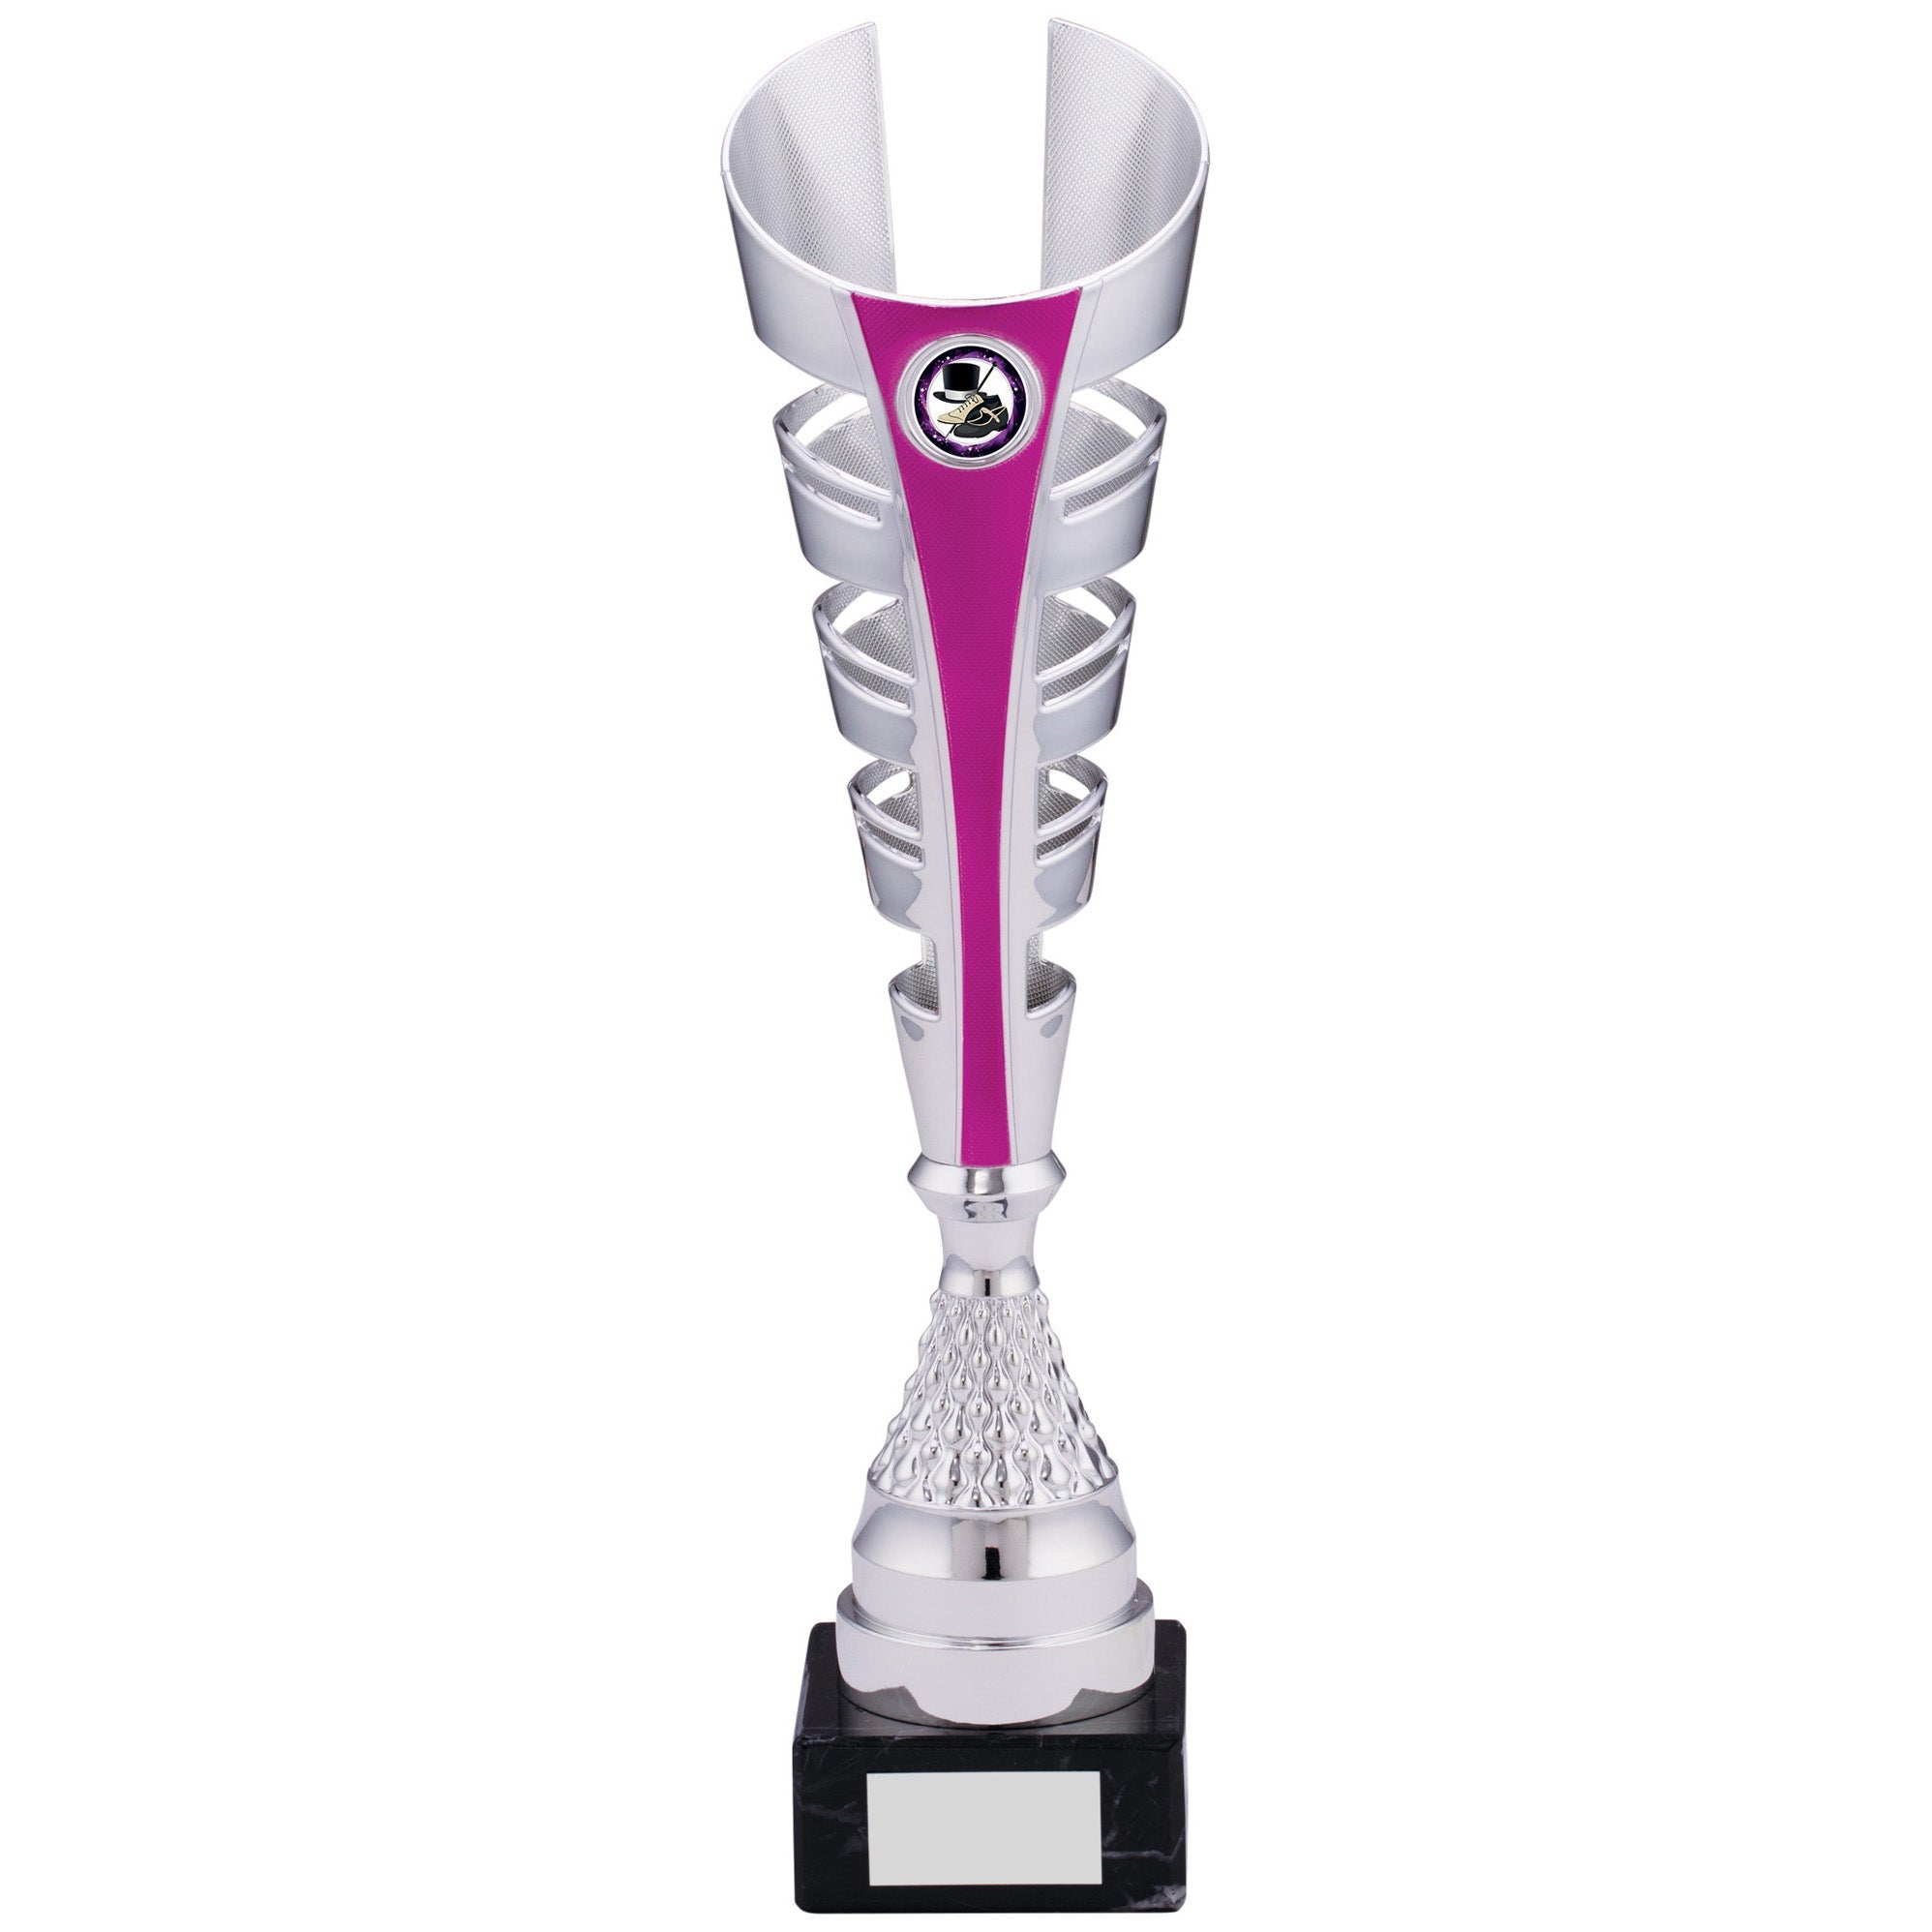 Silver and Pink Futuristic Plastic Trophy Cup on Marble Base